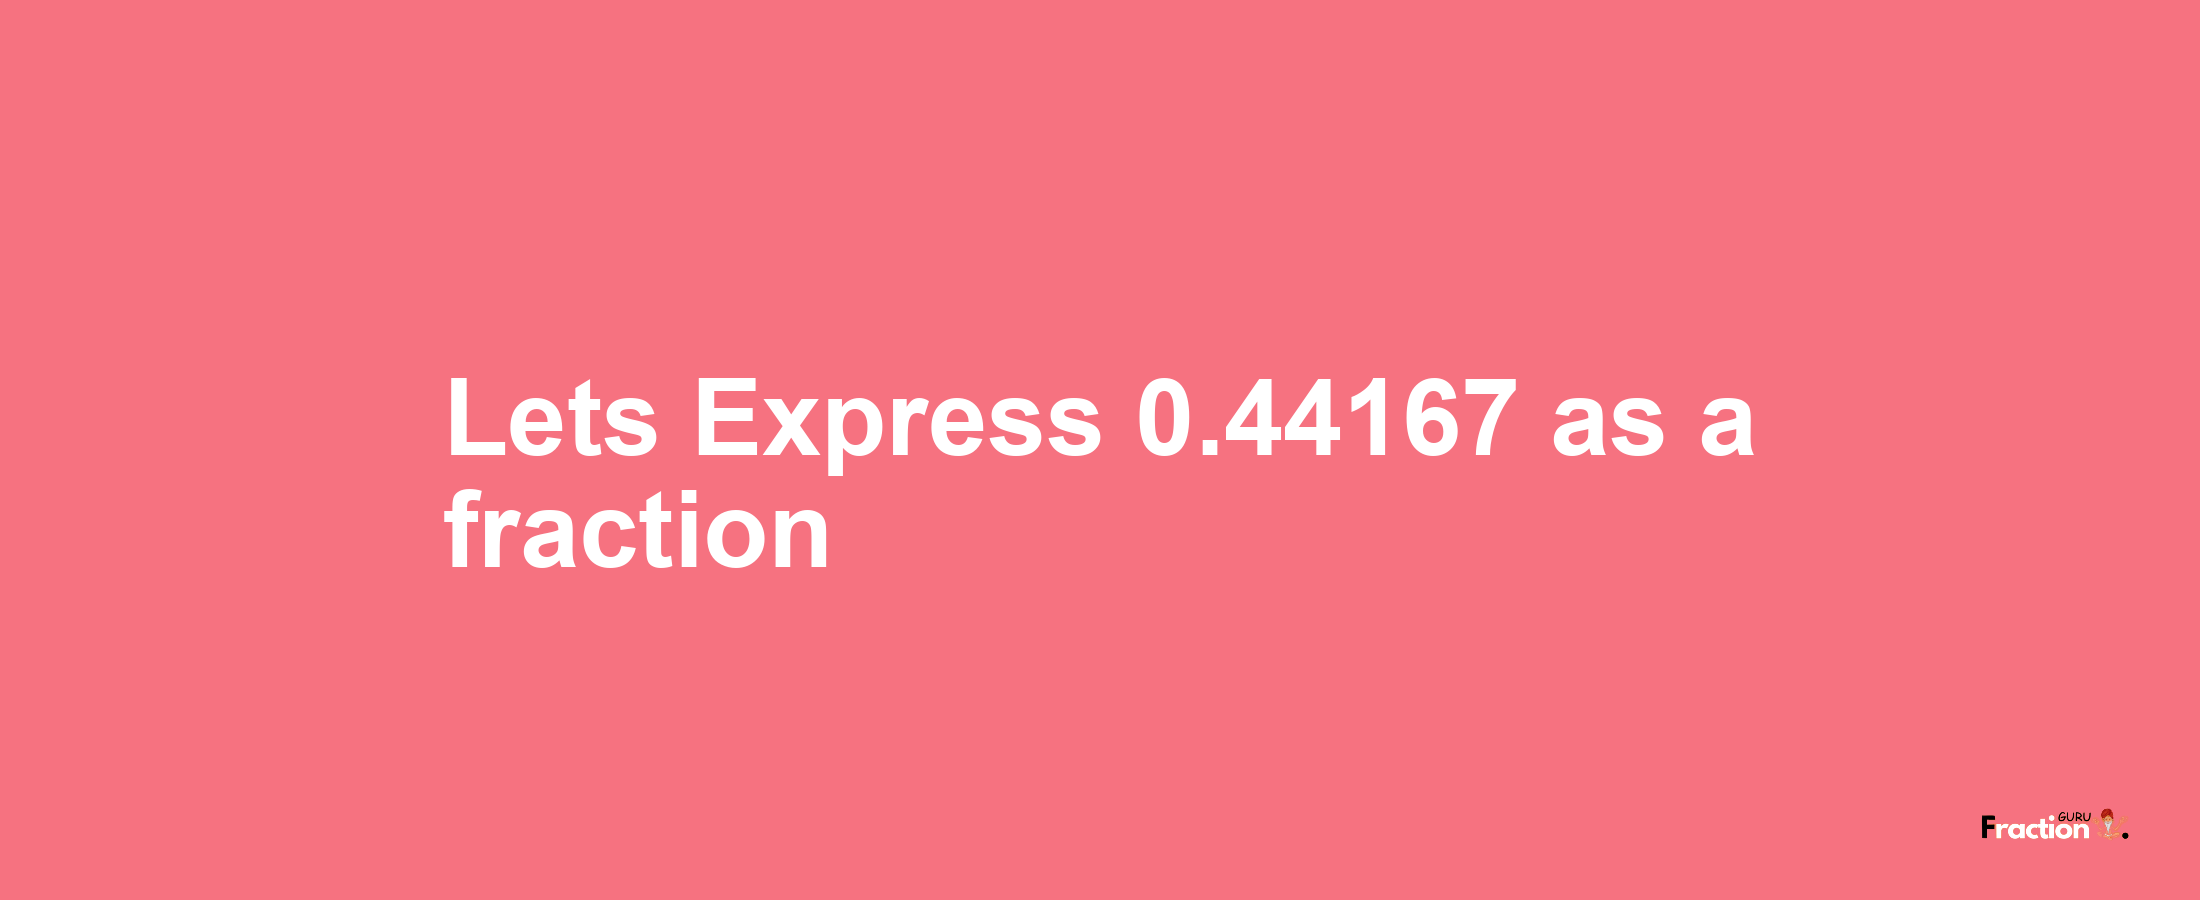 Lets Express 0.44167 as afraction